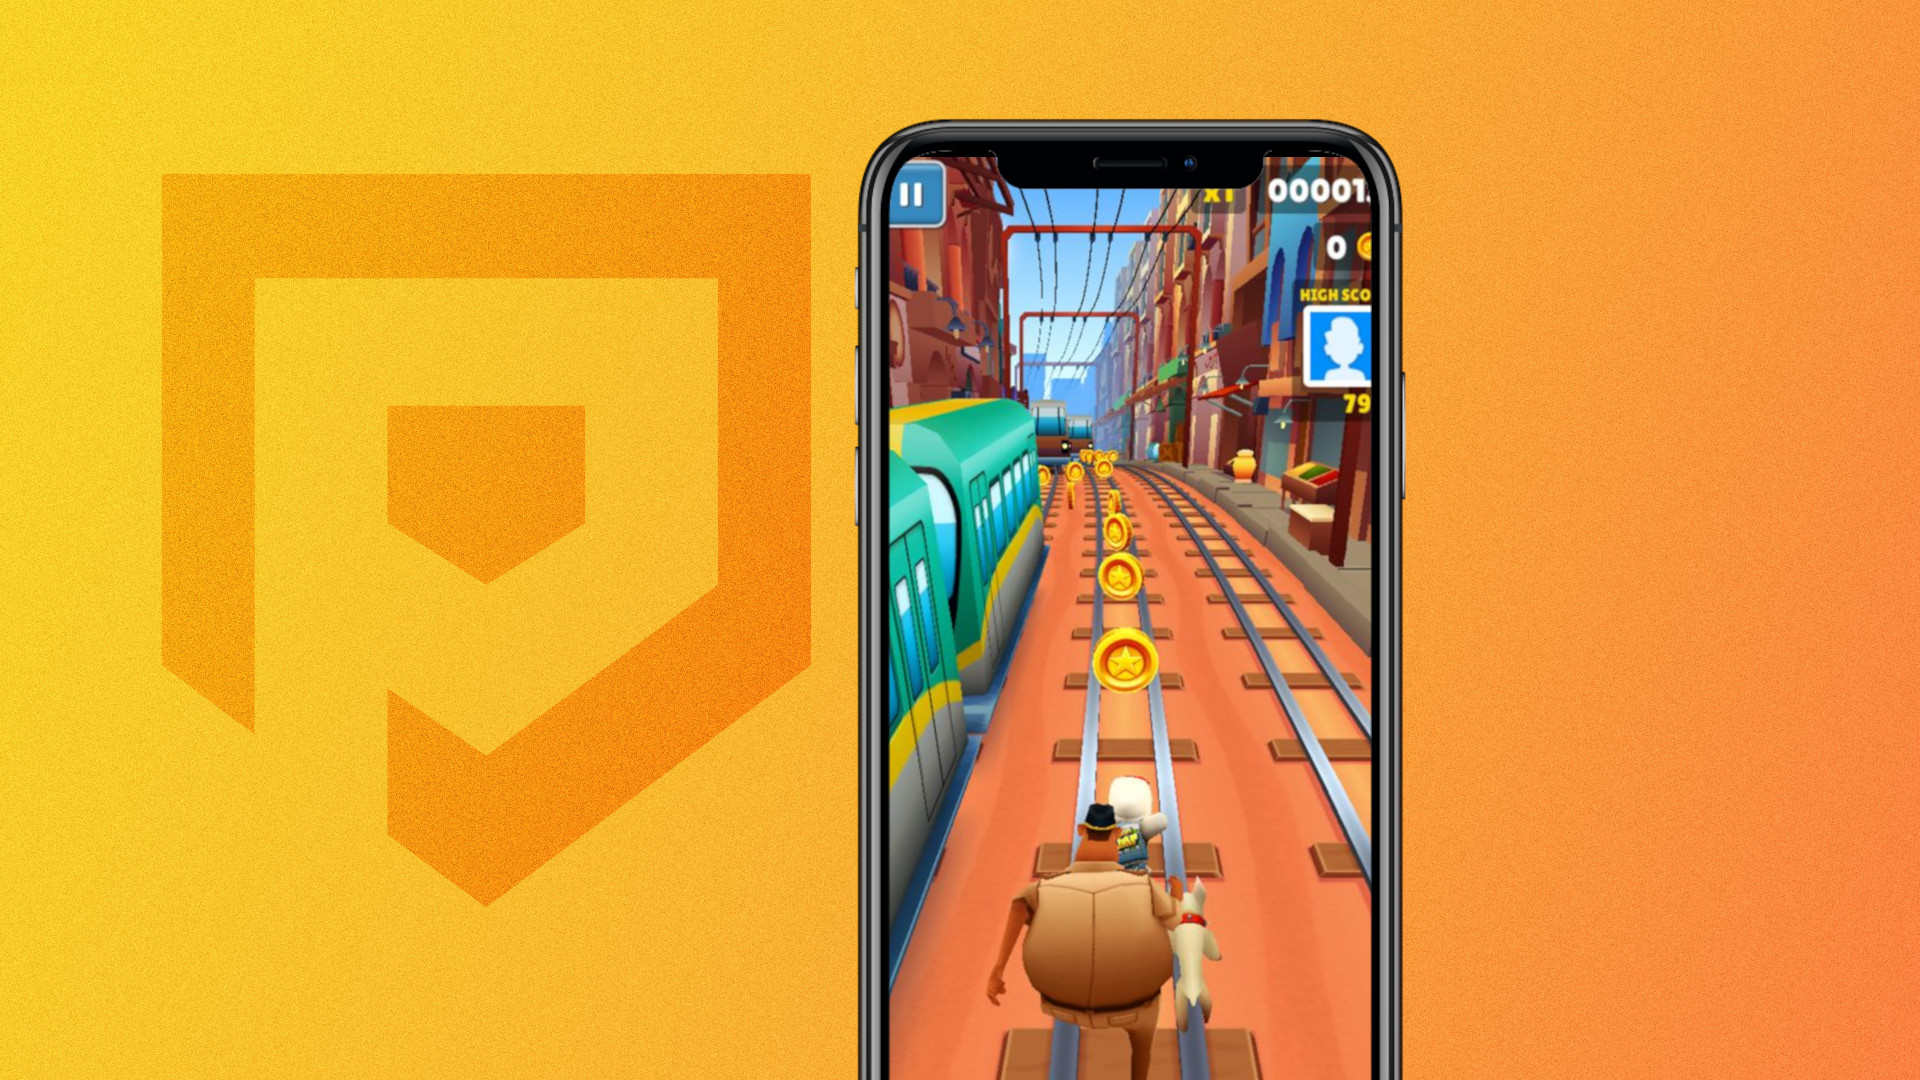 Subway Surfers Game: How to Download APK for Android, PC, iOS